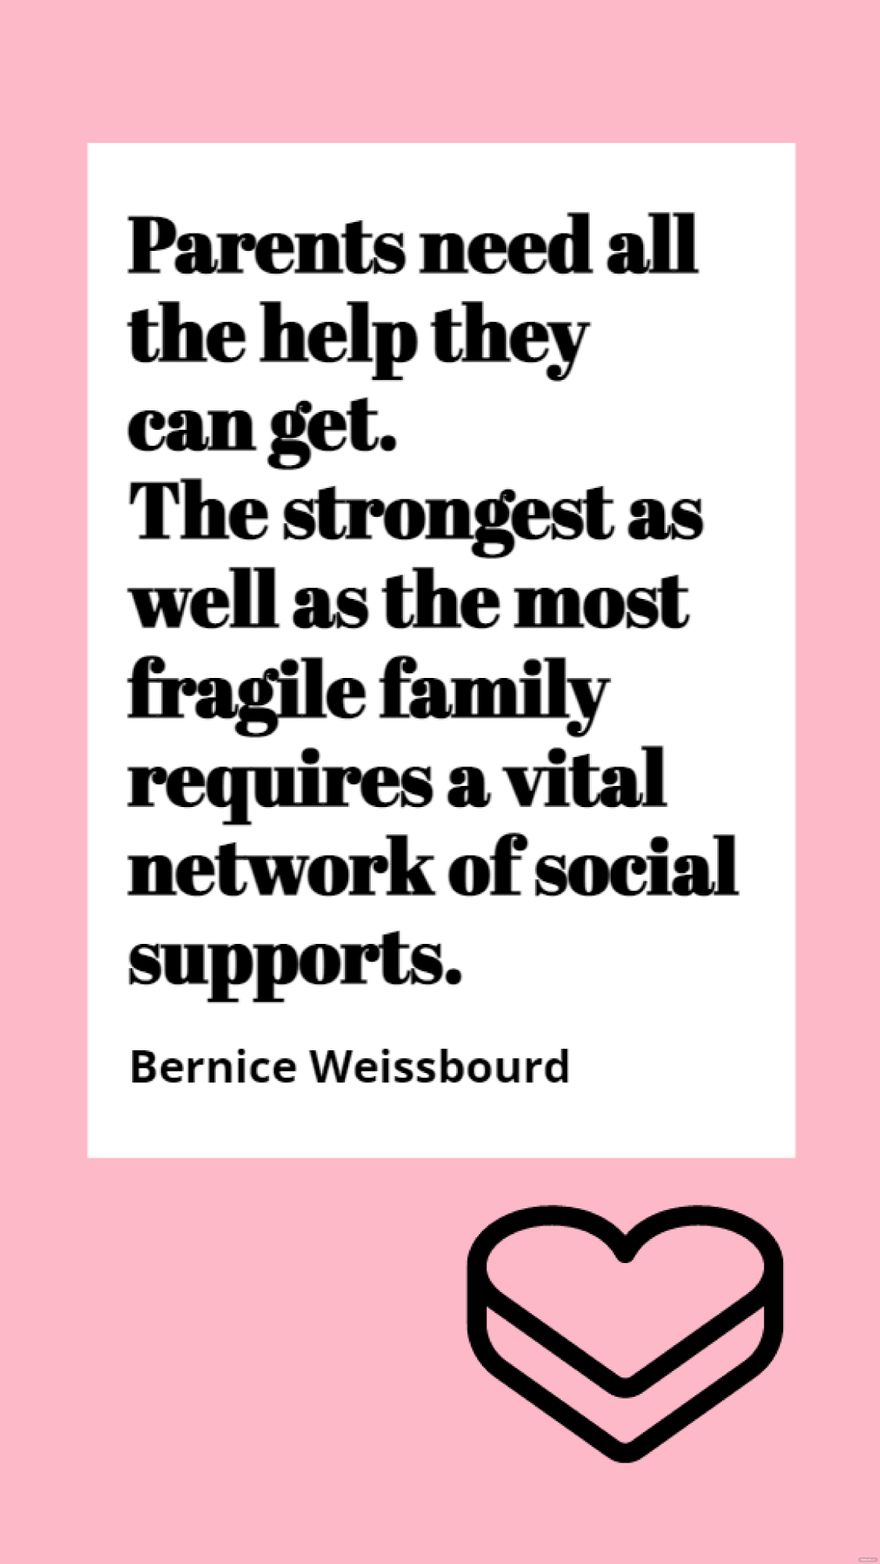 Bernice Weissbourd - Parents need all the help they can get. The strongest as well as the most fragile family requires a vital network of social supports. in JPG